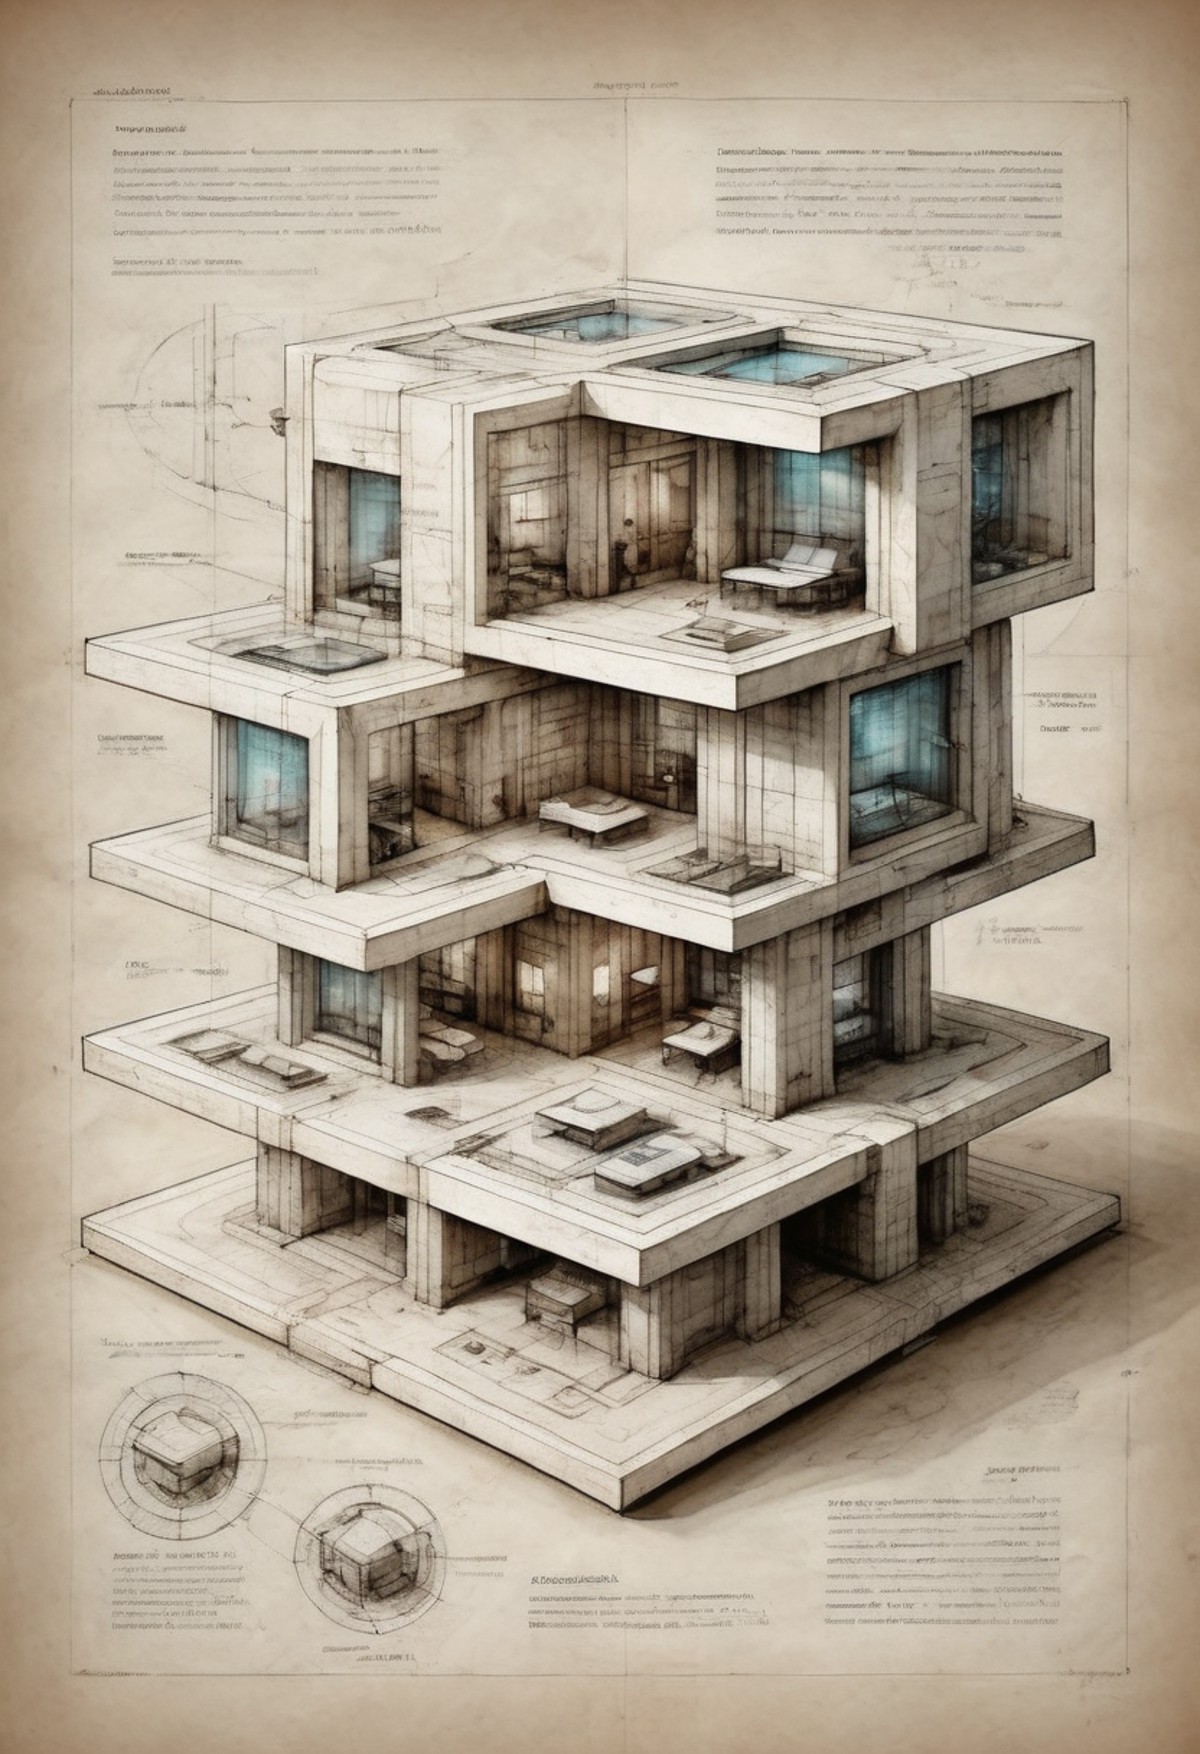 annotated architectural study concept on parchment for futuristic homes incorporating modular cuboid structures and interl...